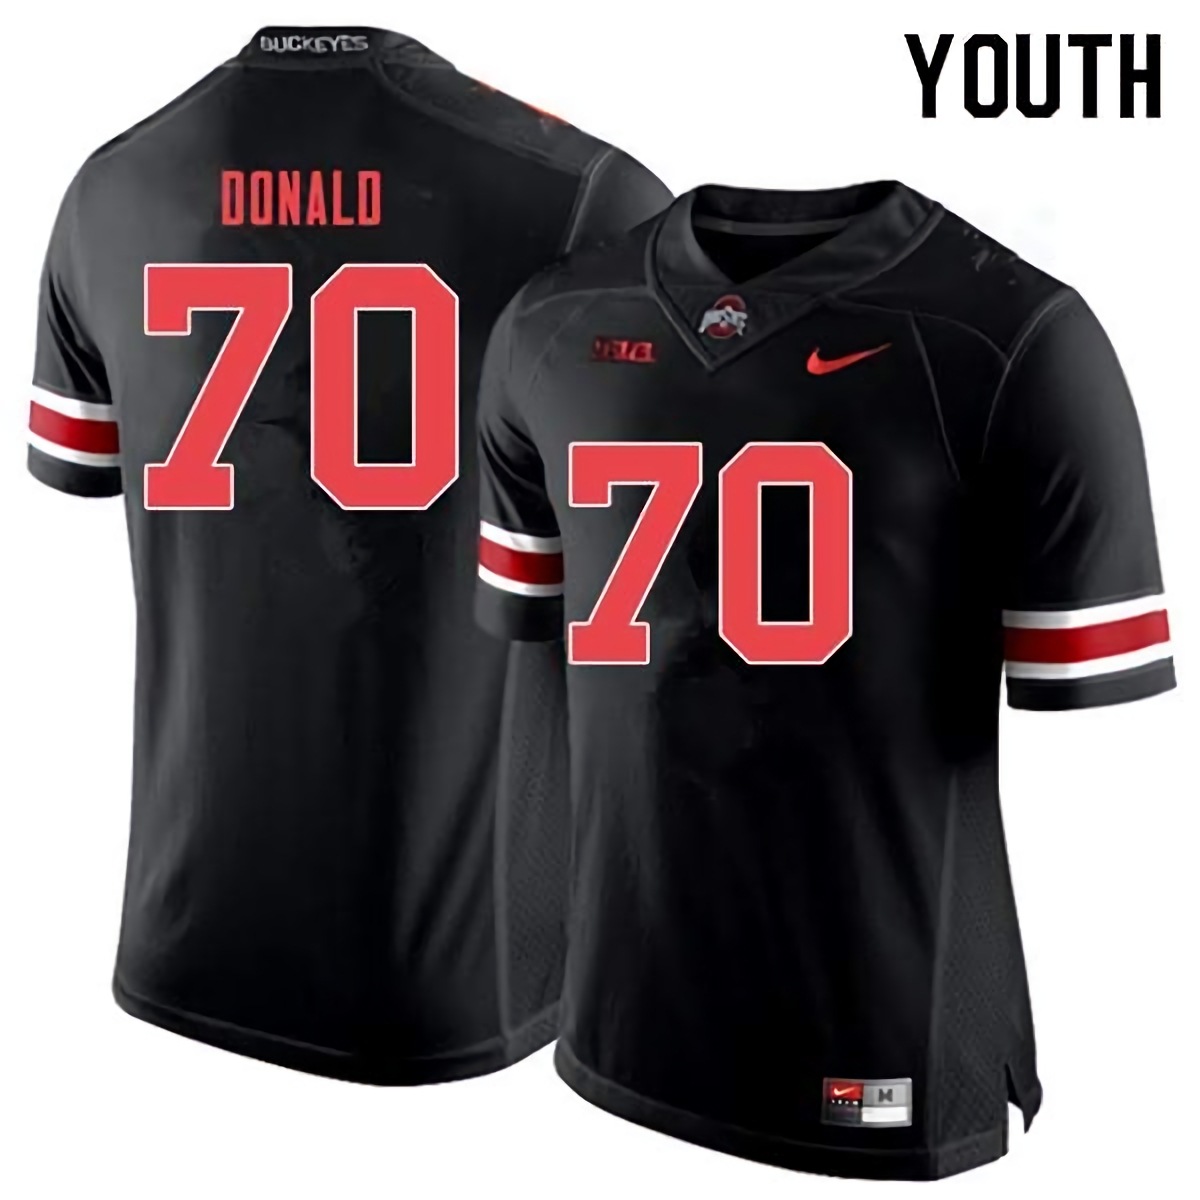 Noah Donald Ohio State Buckeyes Youth NCAA #70 Nike Black Out College Stitched Football Jersey HVD4456JZ